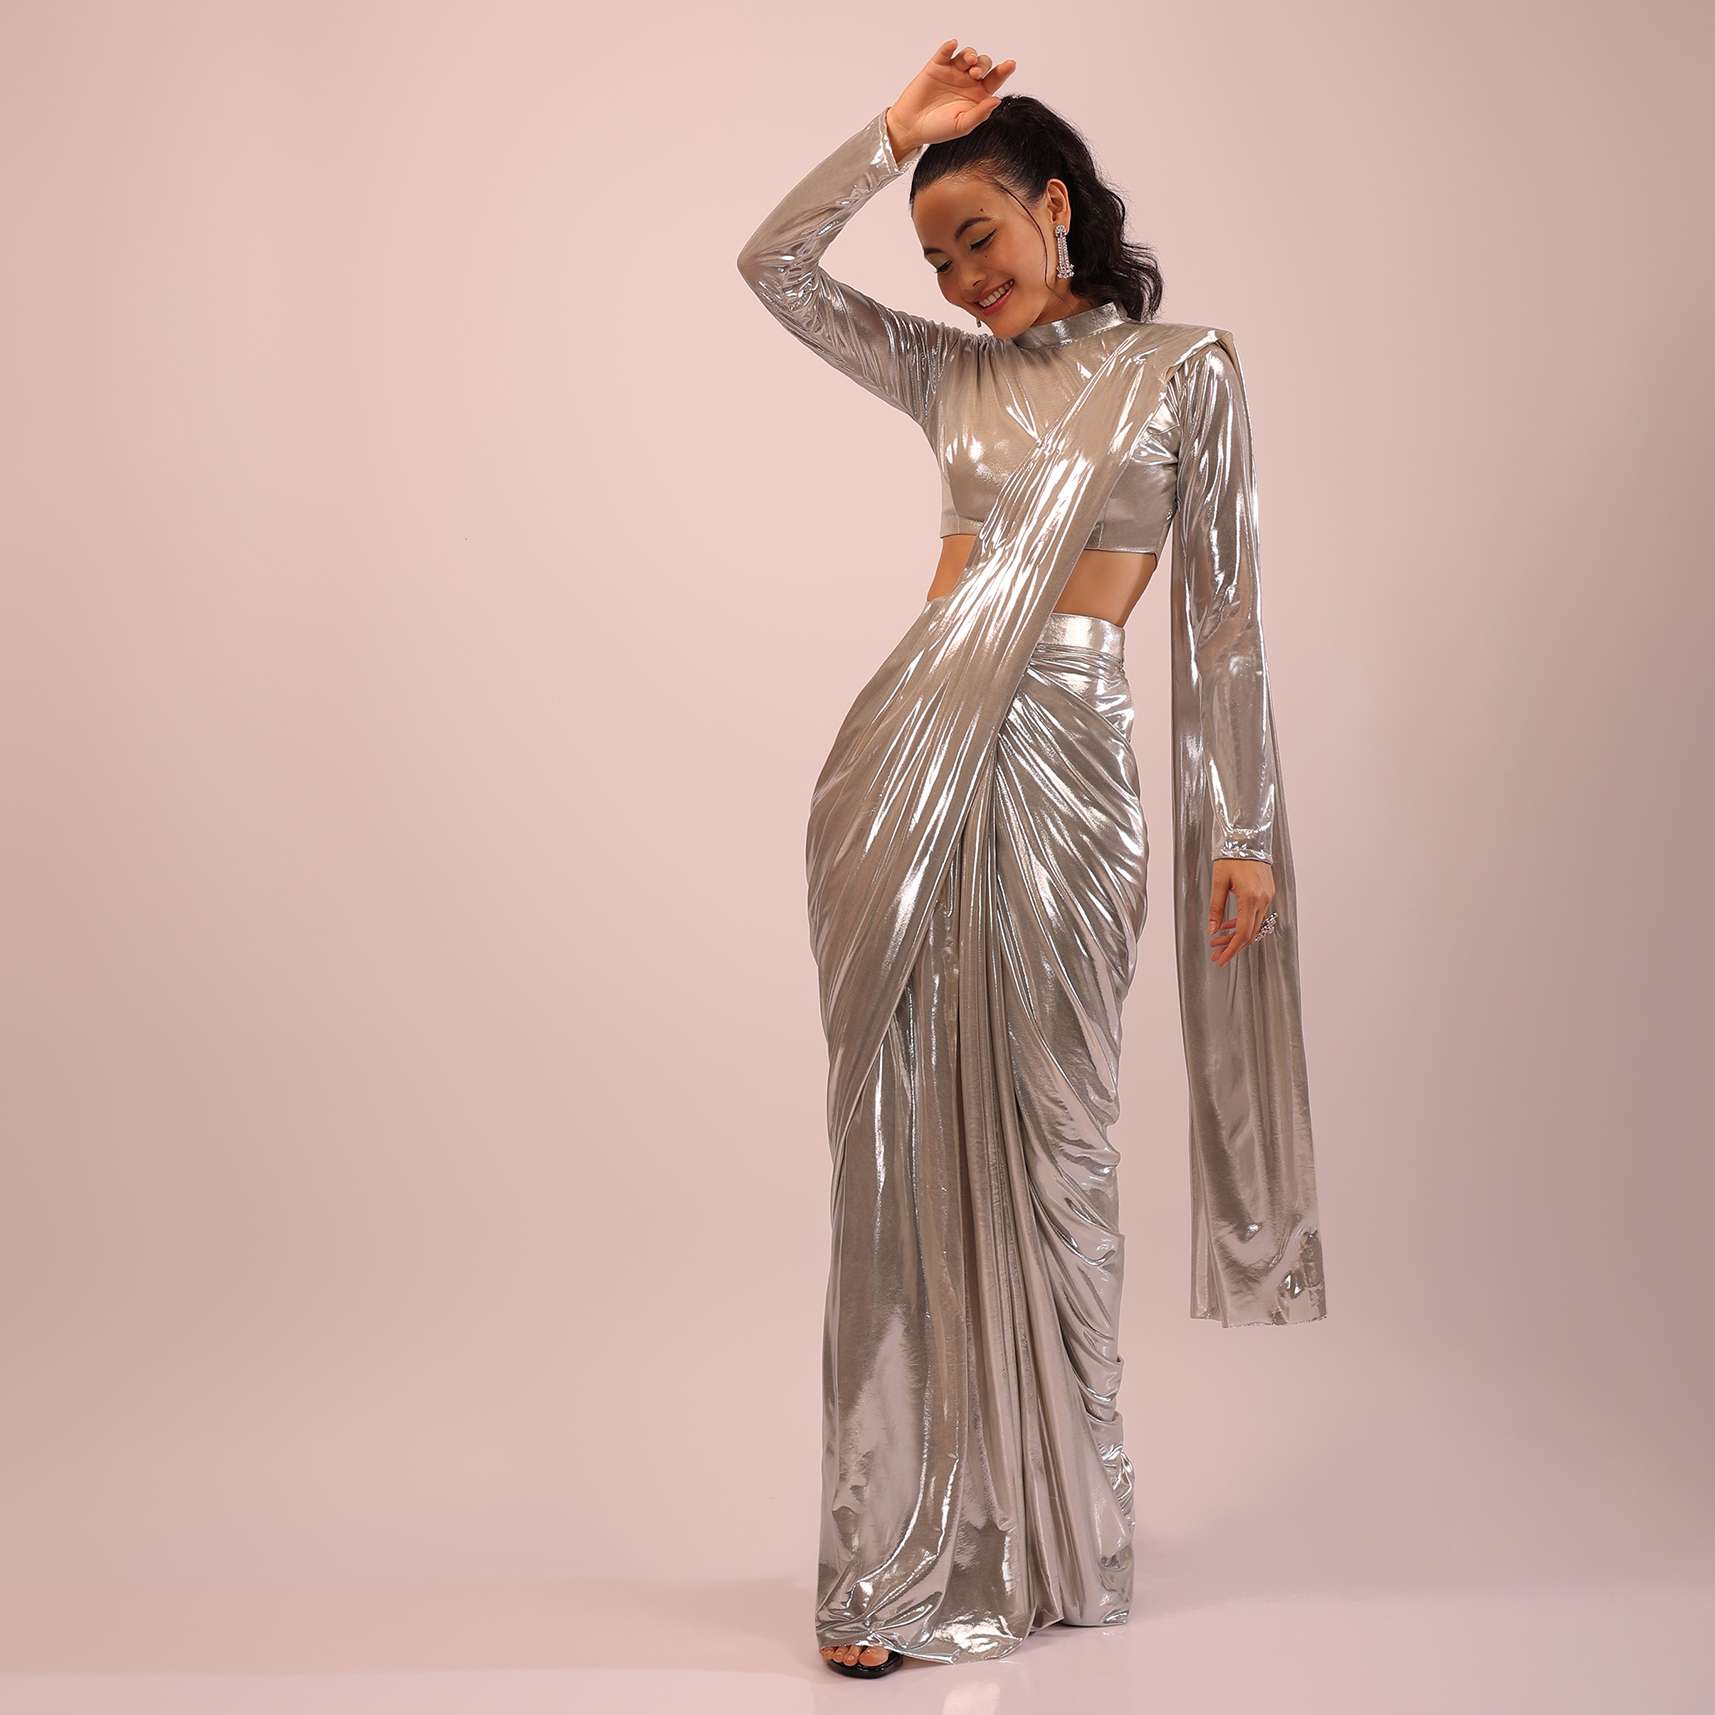 Pearl Ready Pleated Saree In Metallic Lycra With A High Neck Blouse Having Elegant Full Sleeves